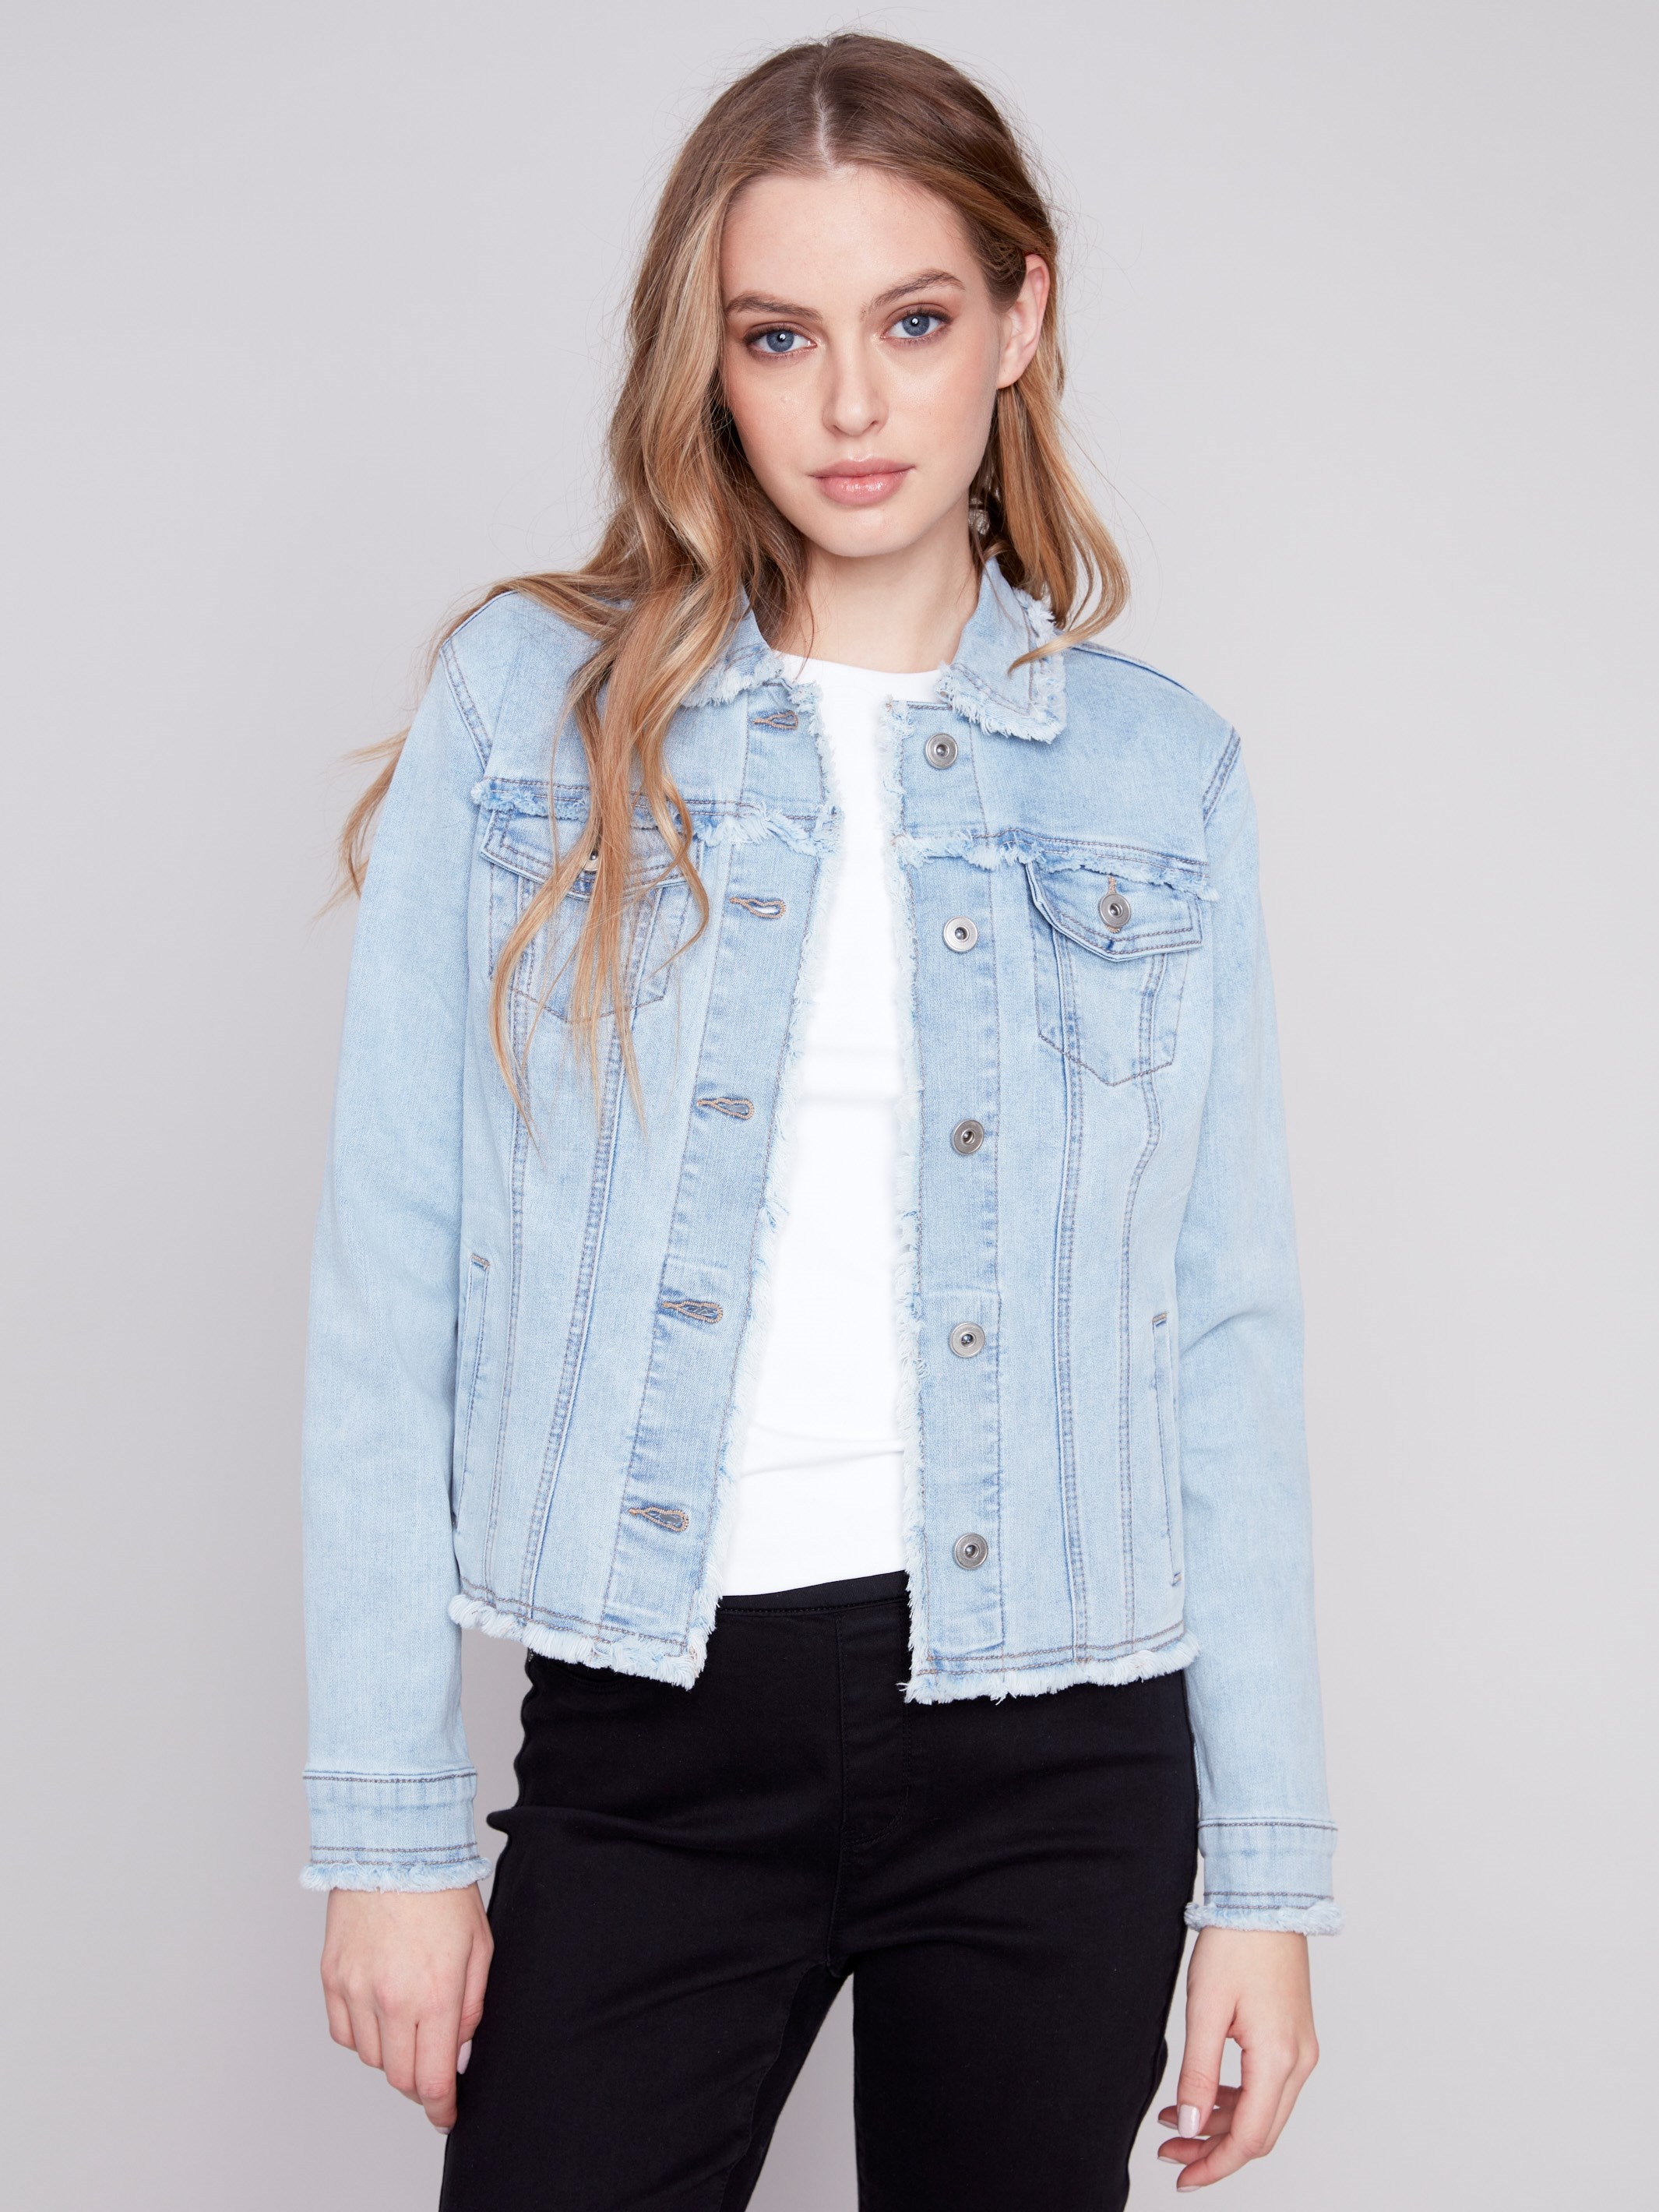 Jean Jacket with Frayed Edges - Bleach Blue - Charlie B Collection Canada - Image 1